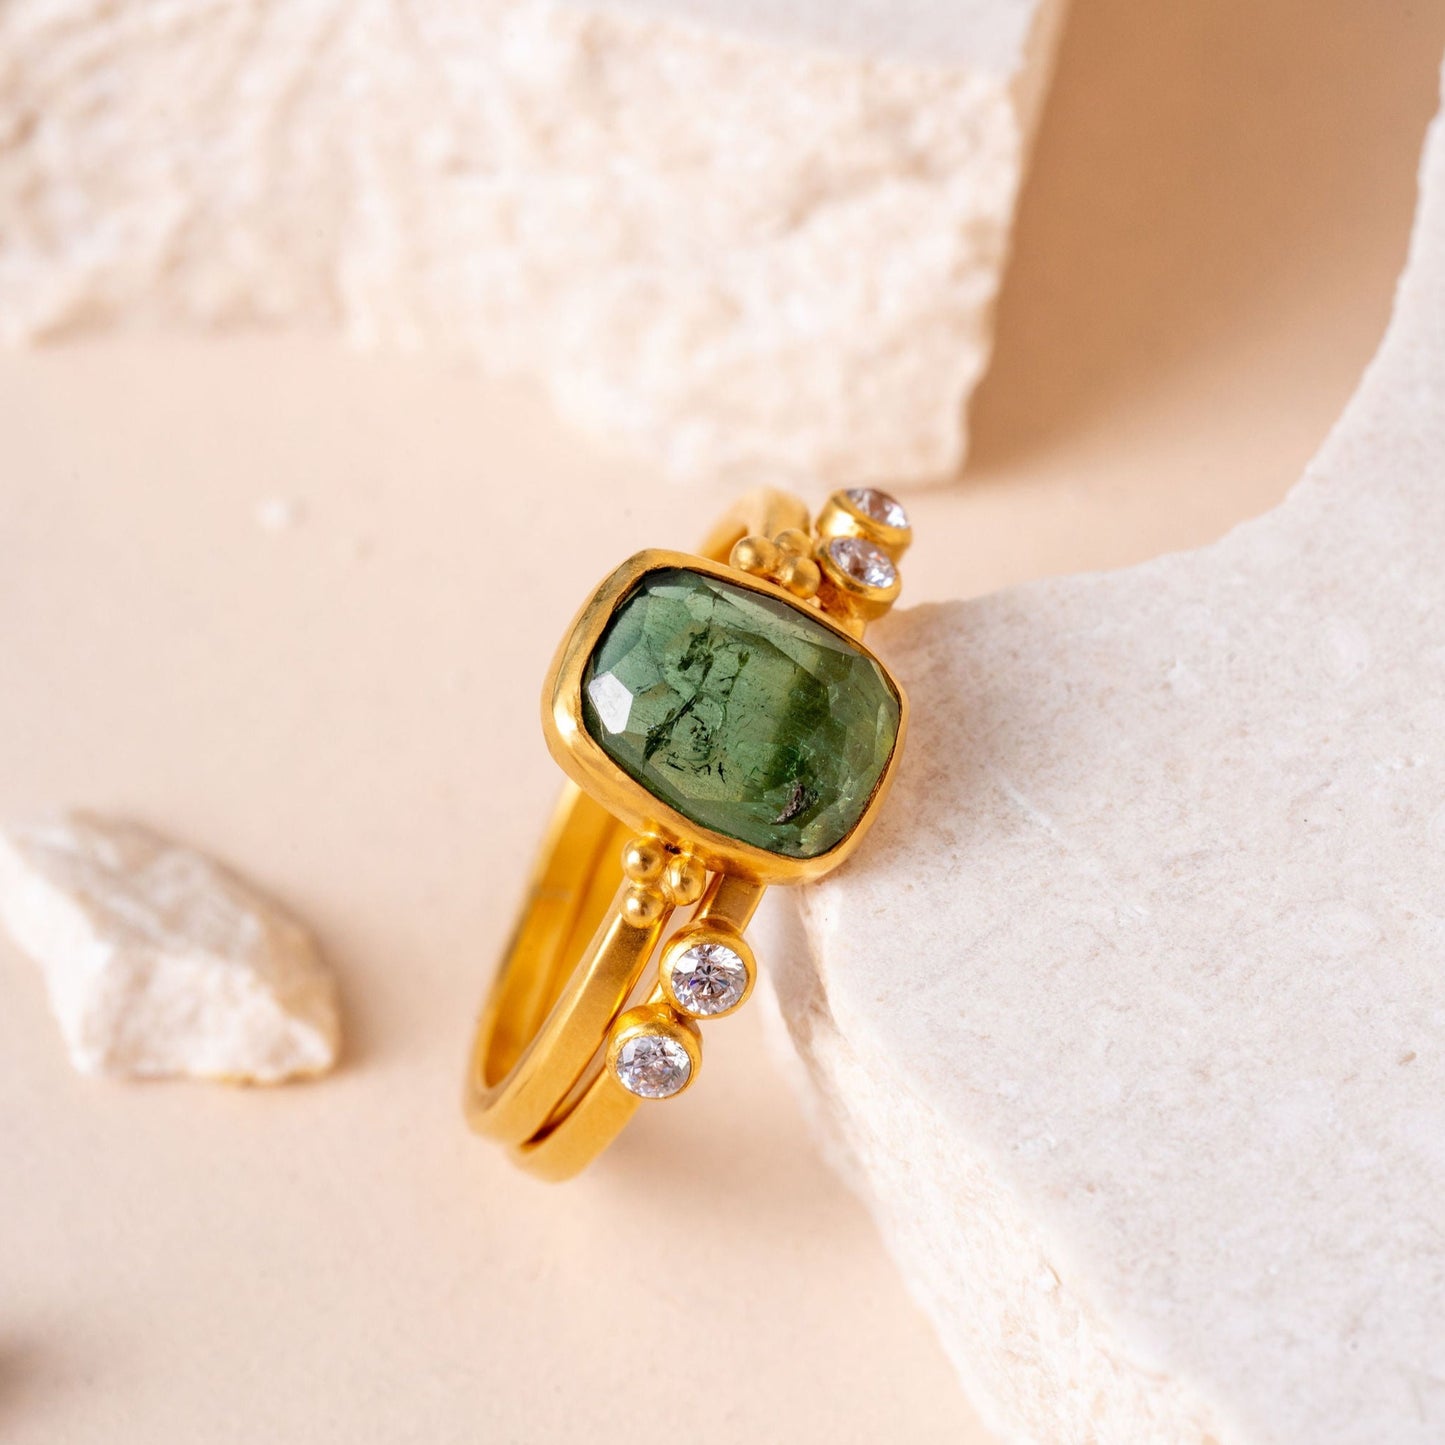 Intricately designed gold rings in a harmonious group, highlighting delicate granulation and the enchanting presence of green tourmaline gemstones